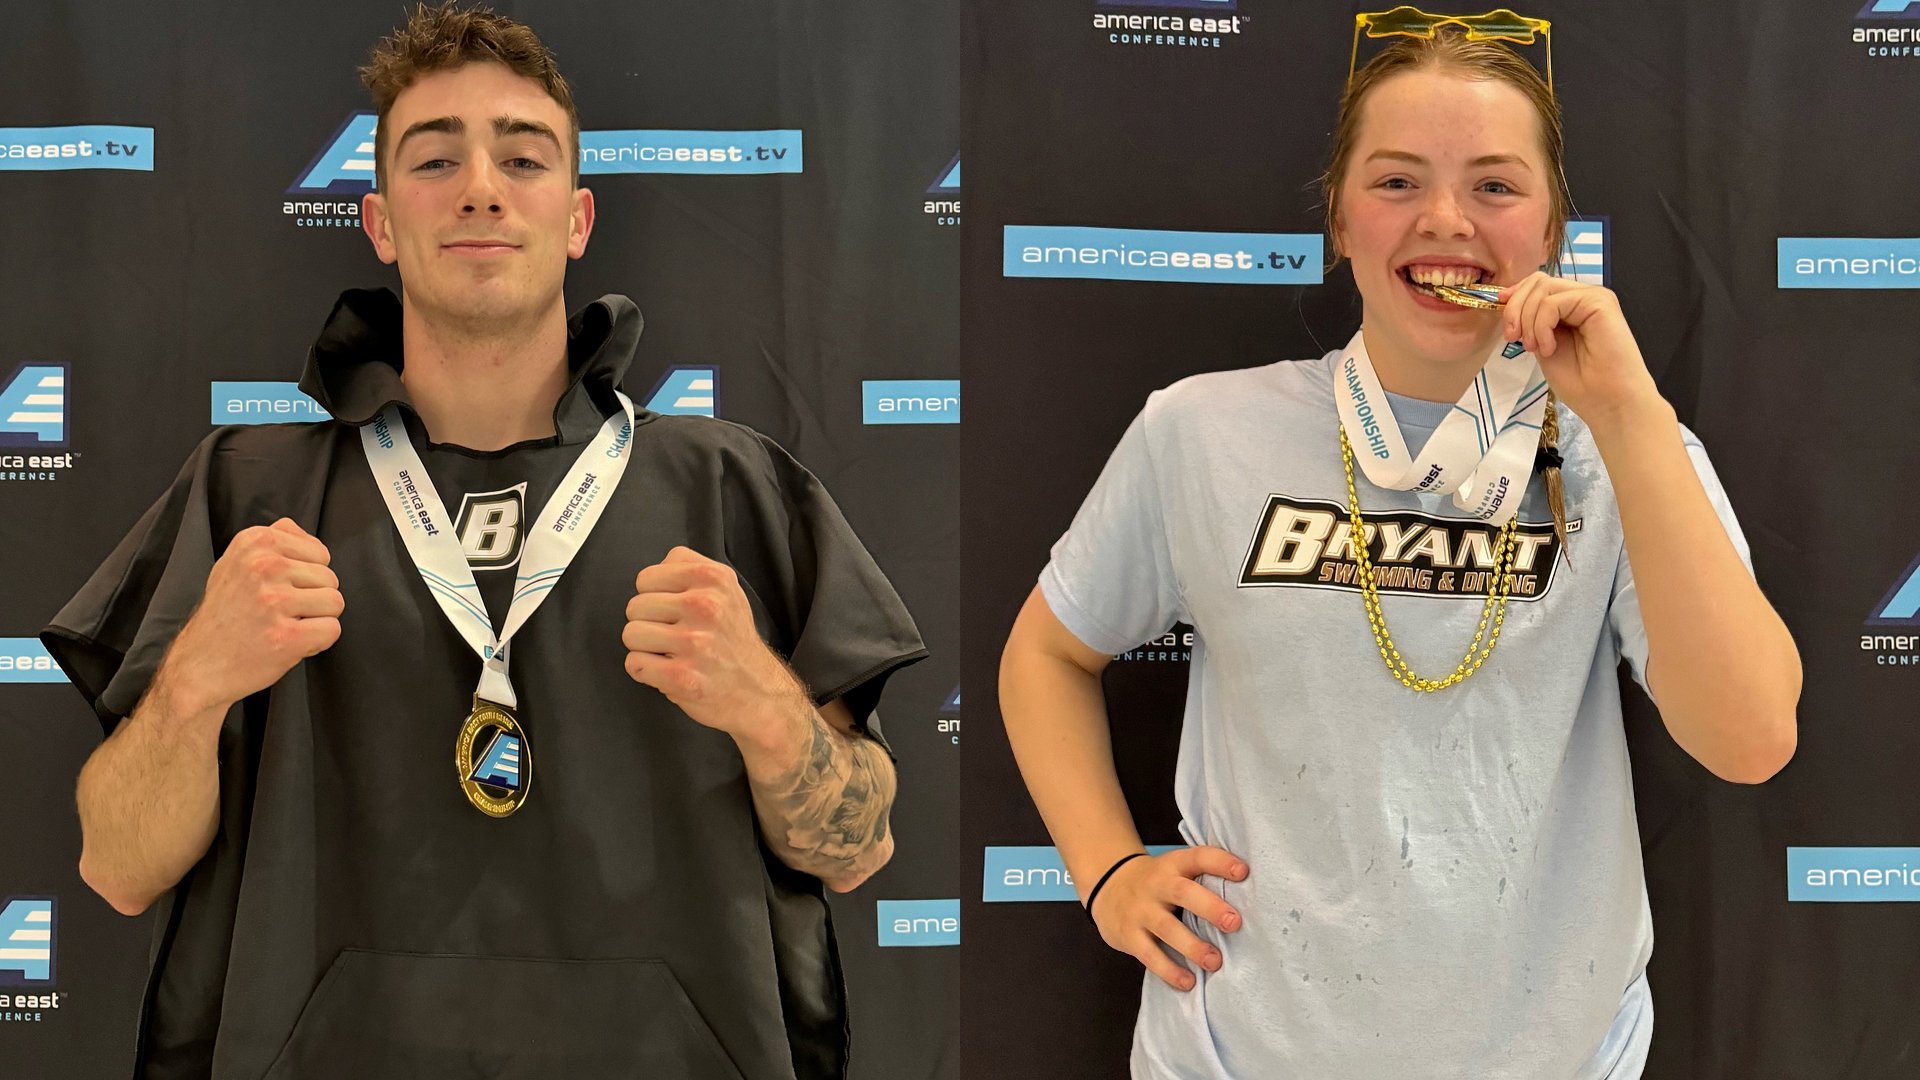 Dawgs pick up five medals on Day 1 of AE Championships